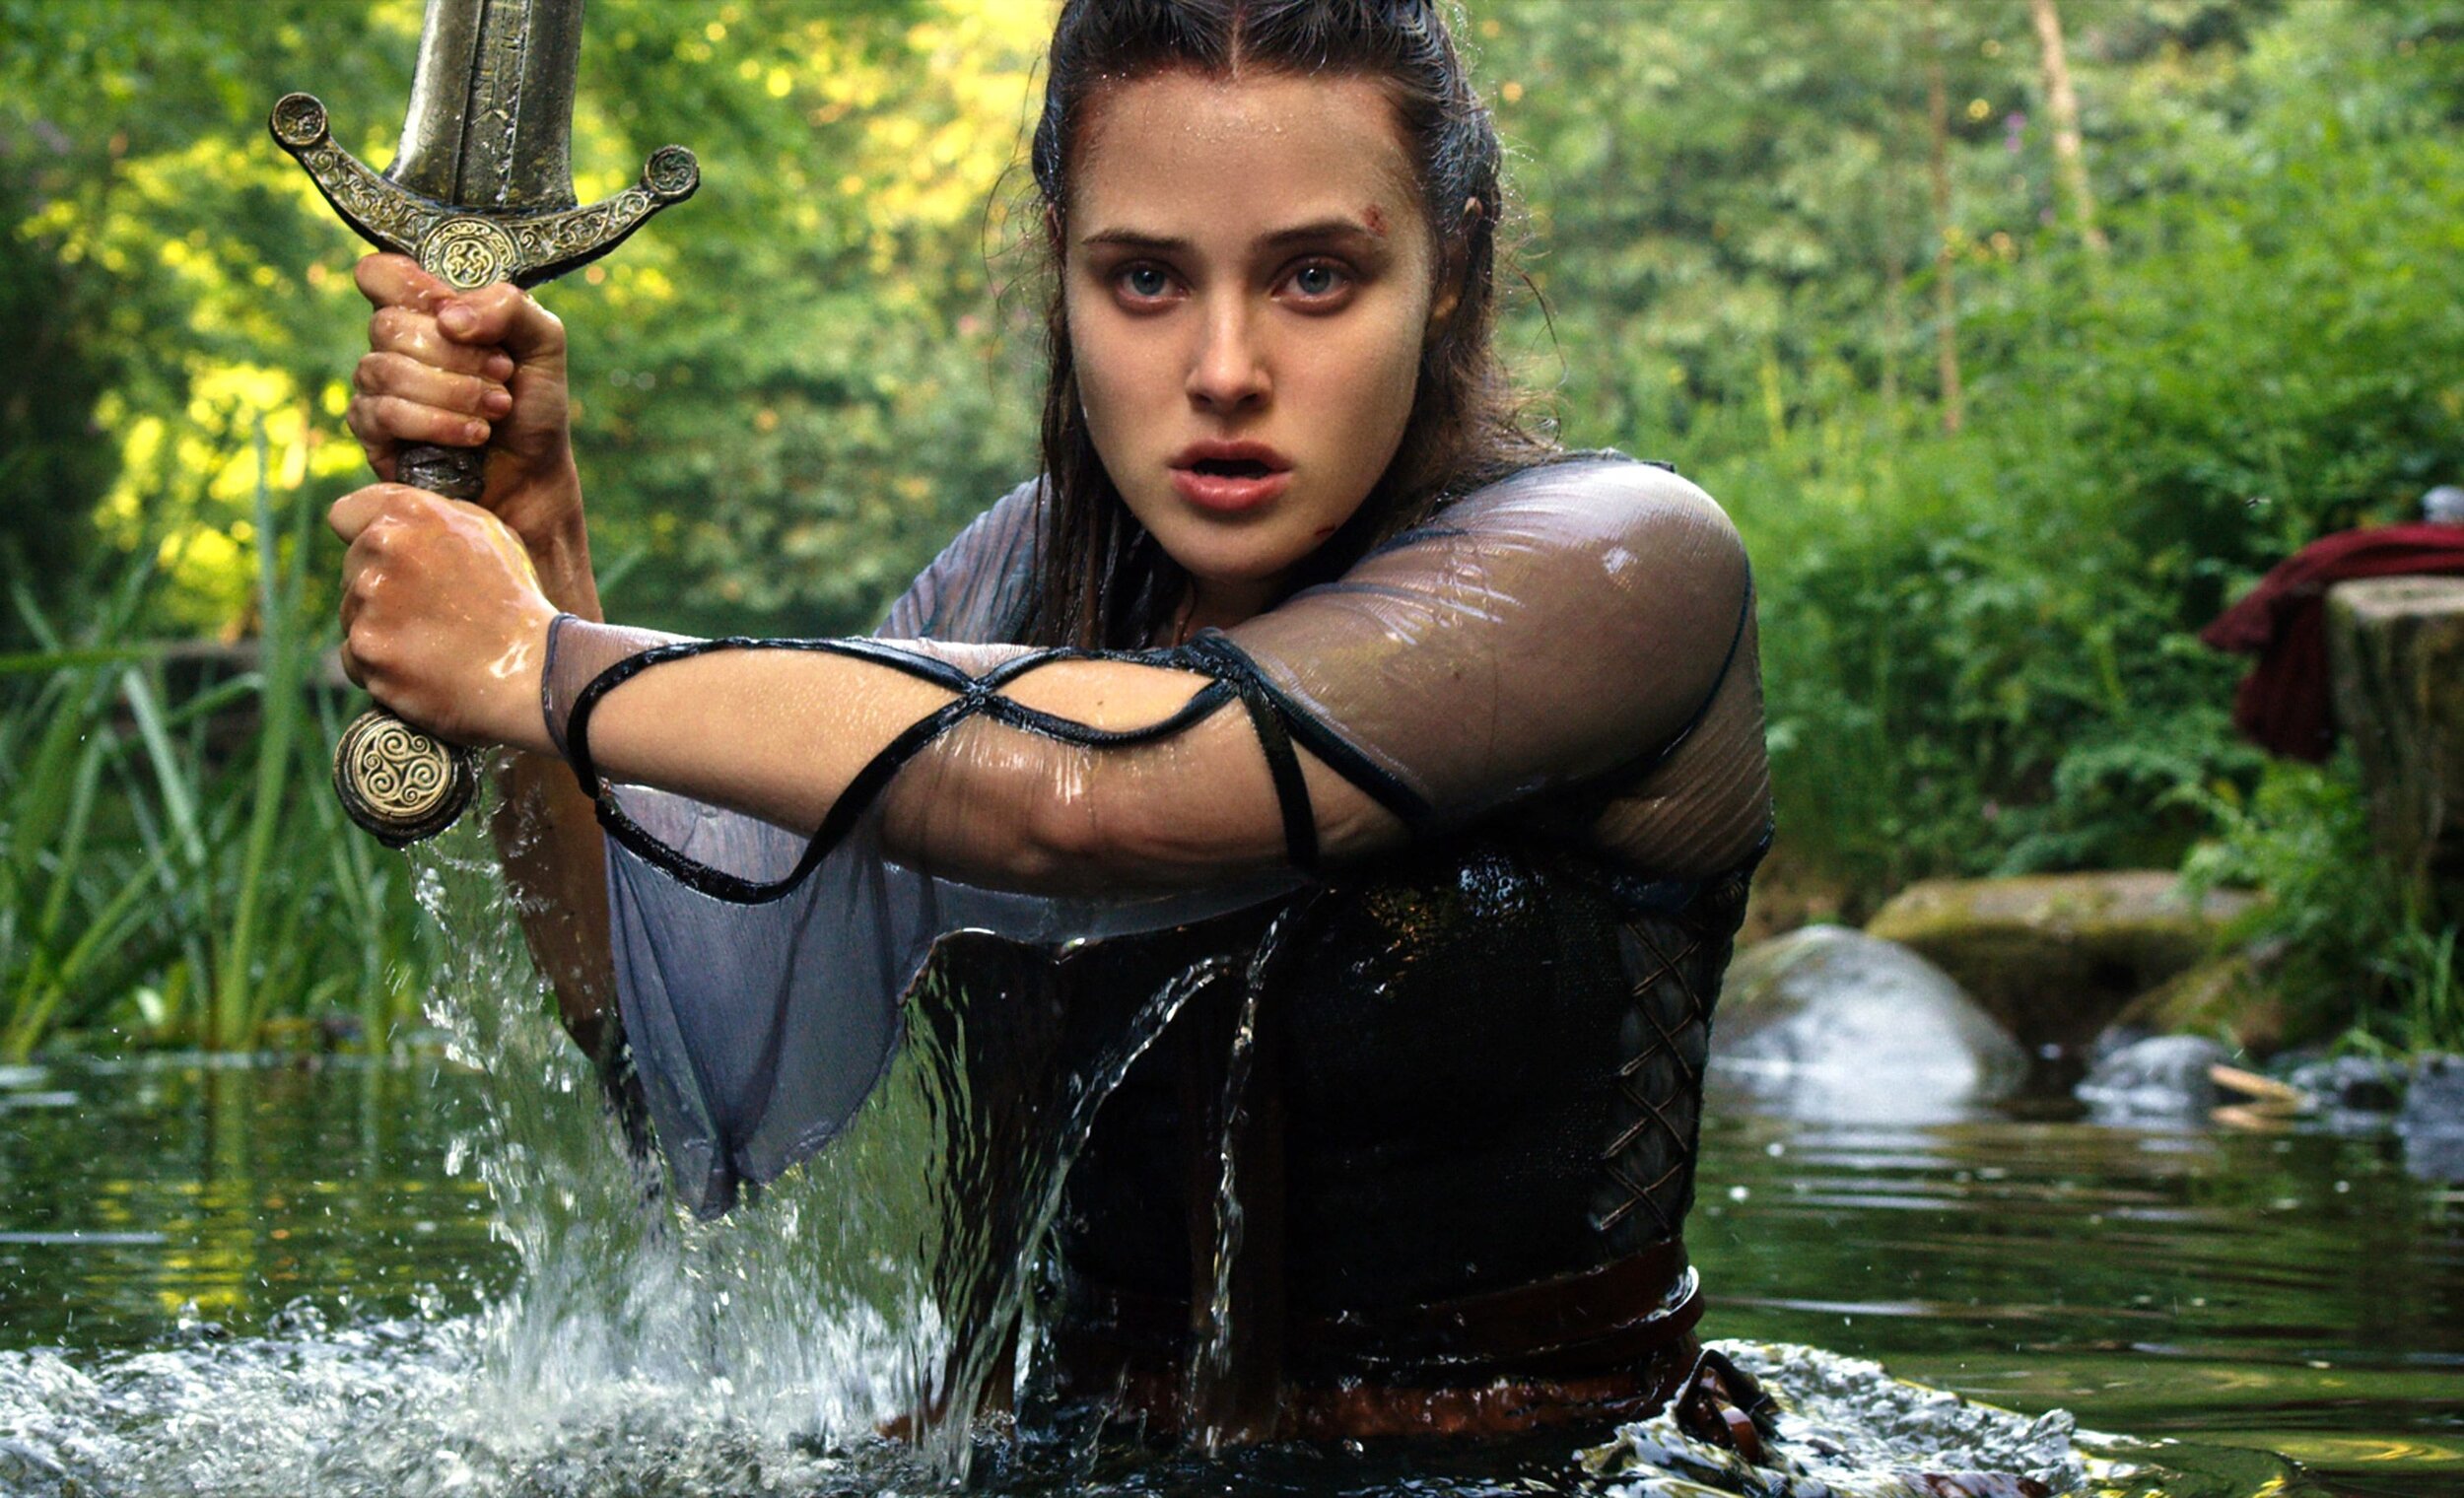 Cursed focuses on Nimue, before she becomes the watery tart known as the  Lady of the Lake, here she wields Excalibur.